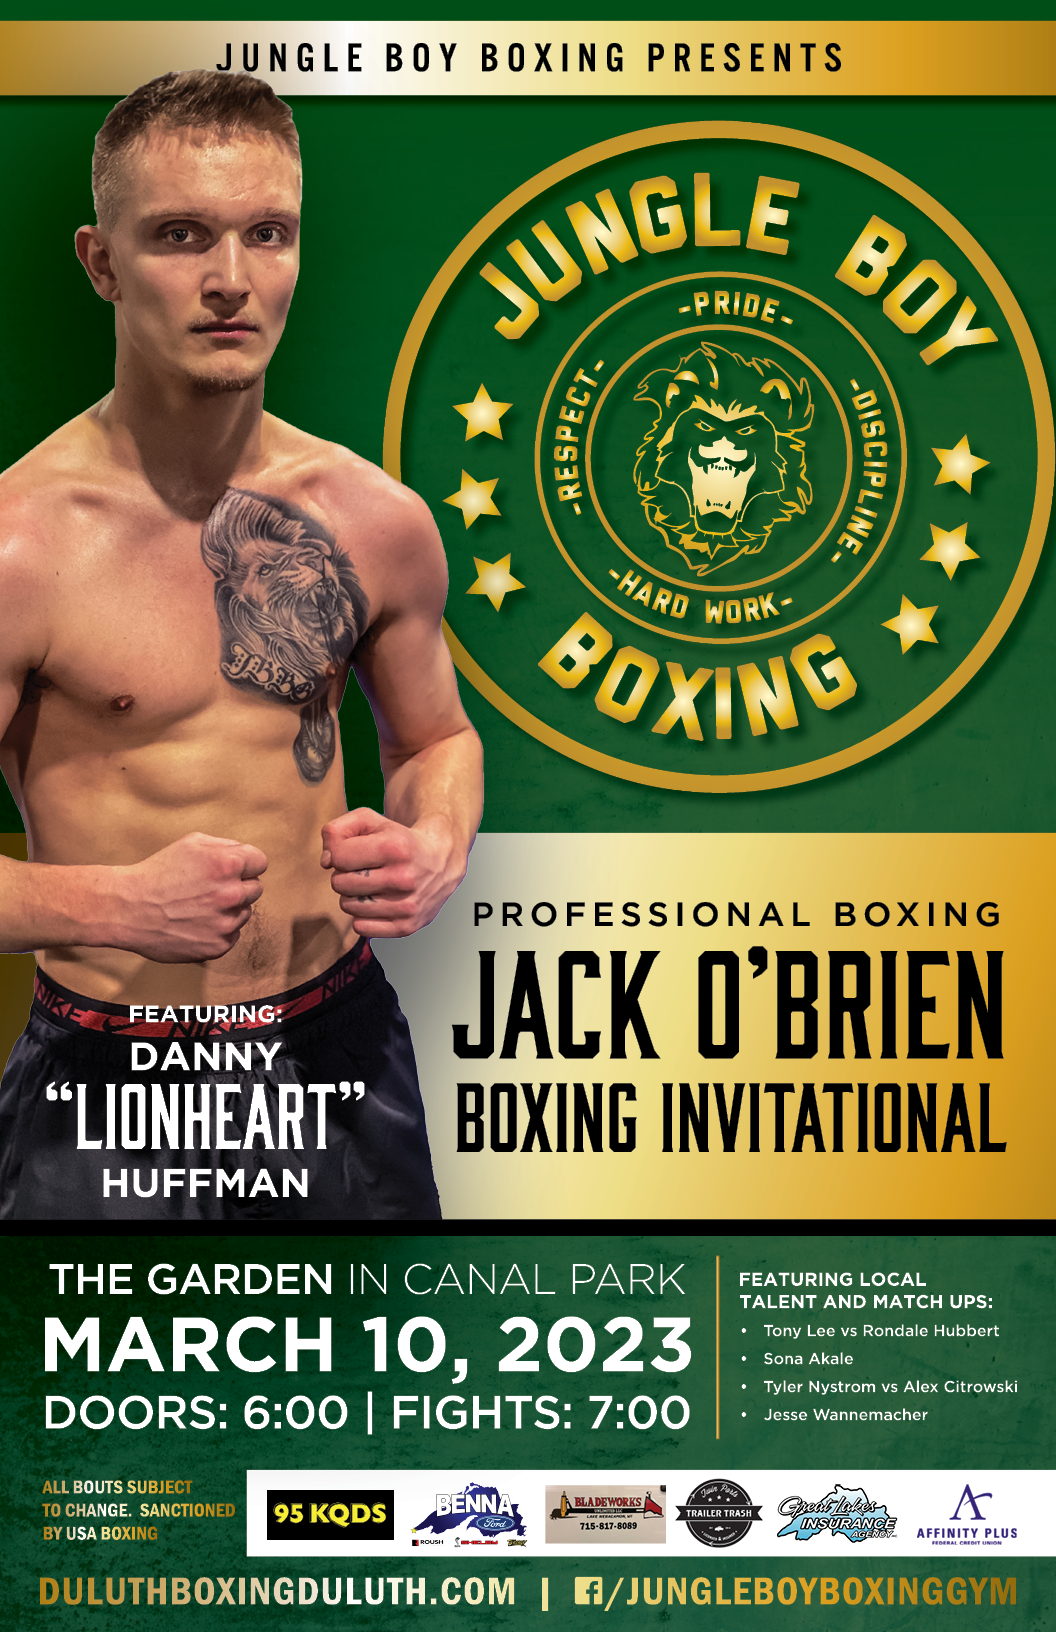 Jack O'Brien Boxing Invitational with Danny "Lionheart" Huffman